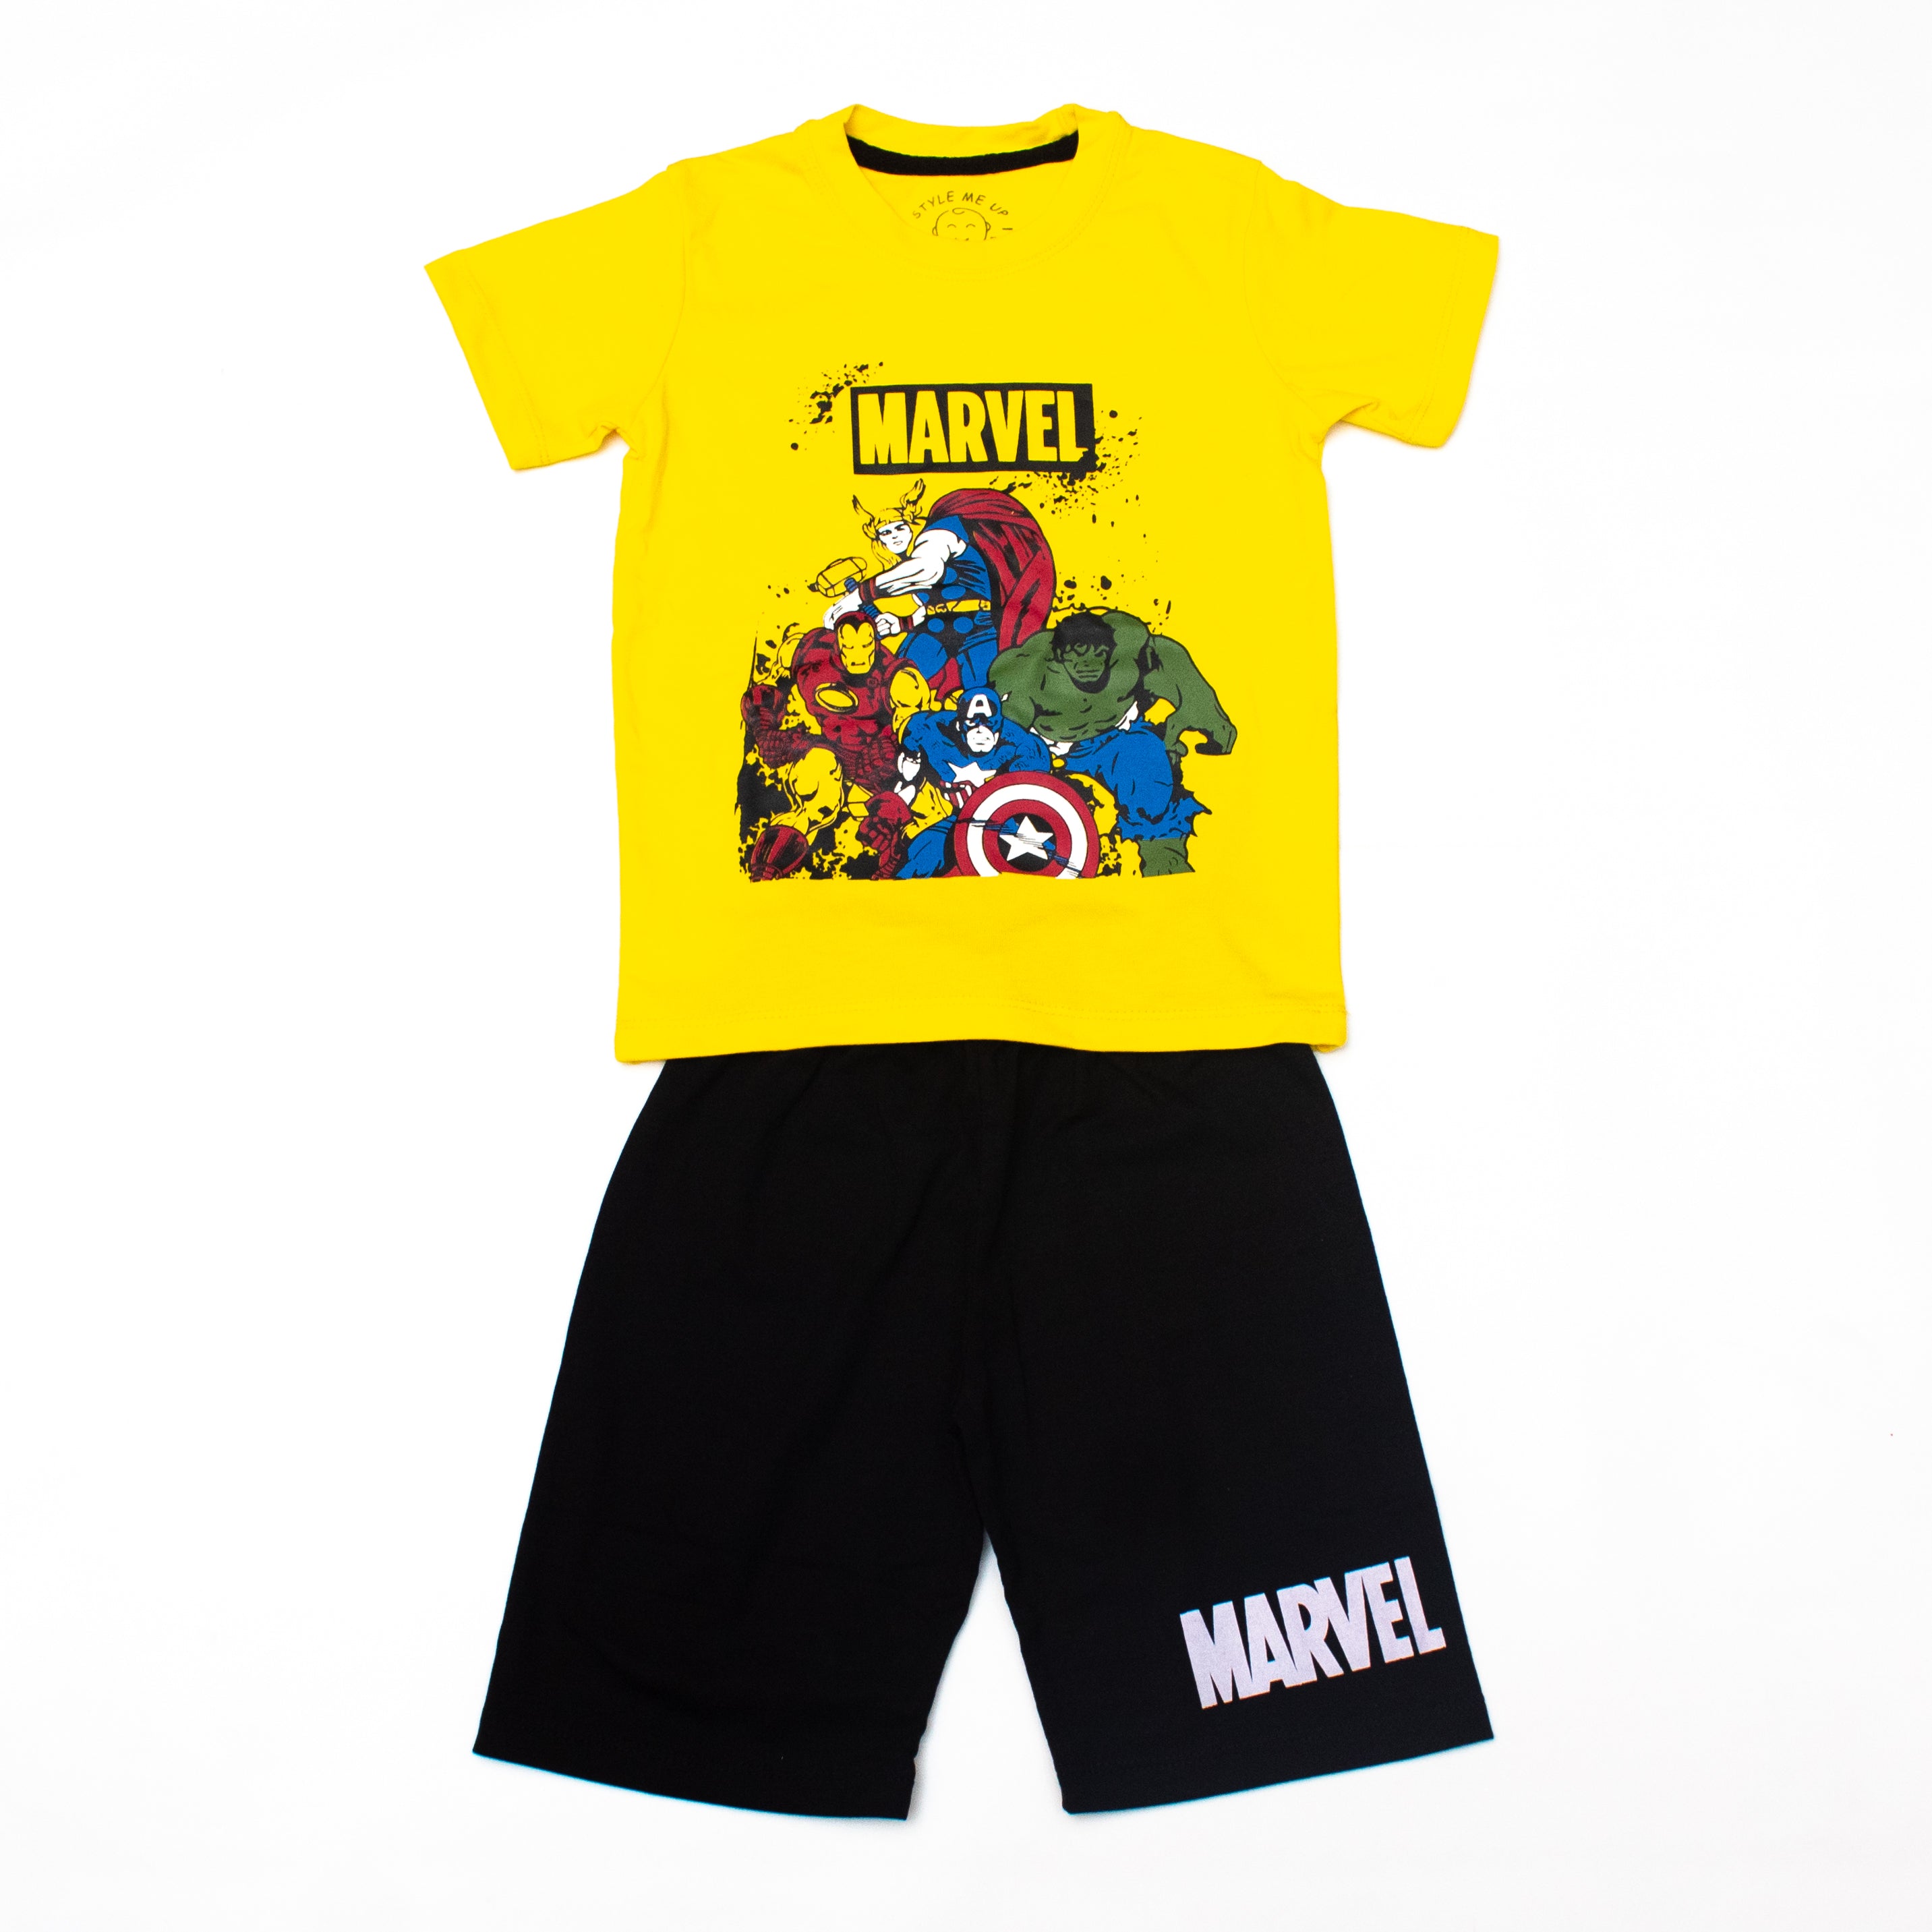 Marvel T-Shirt And Shorts For Kids